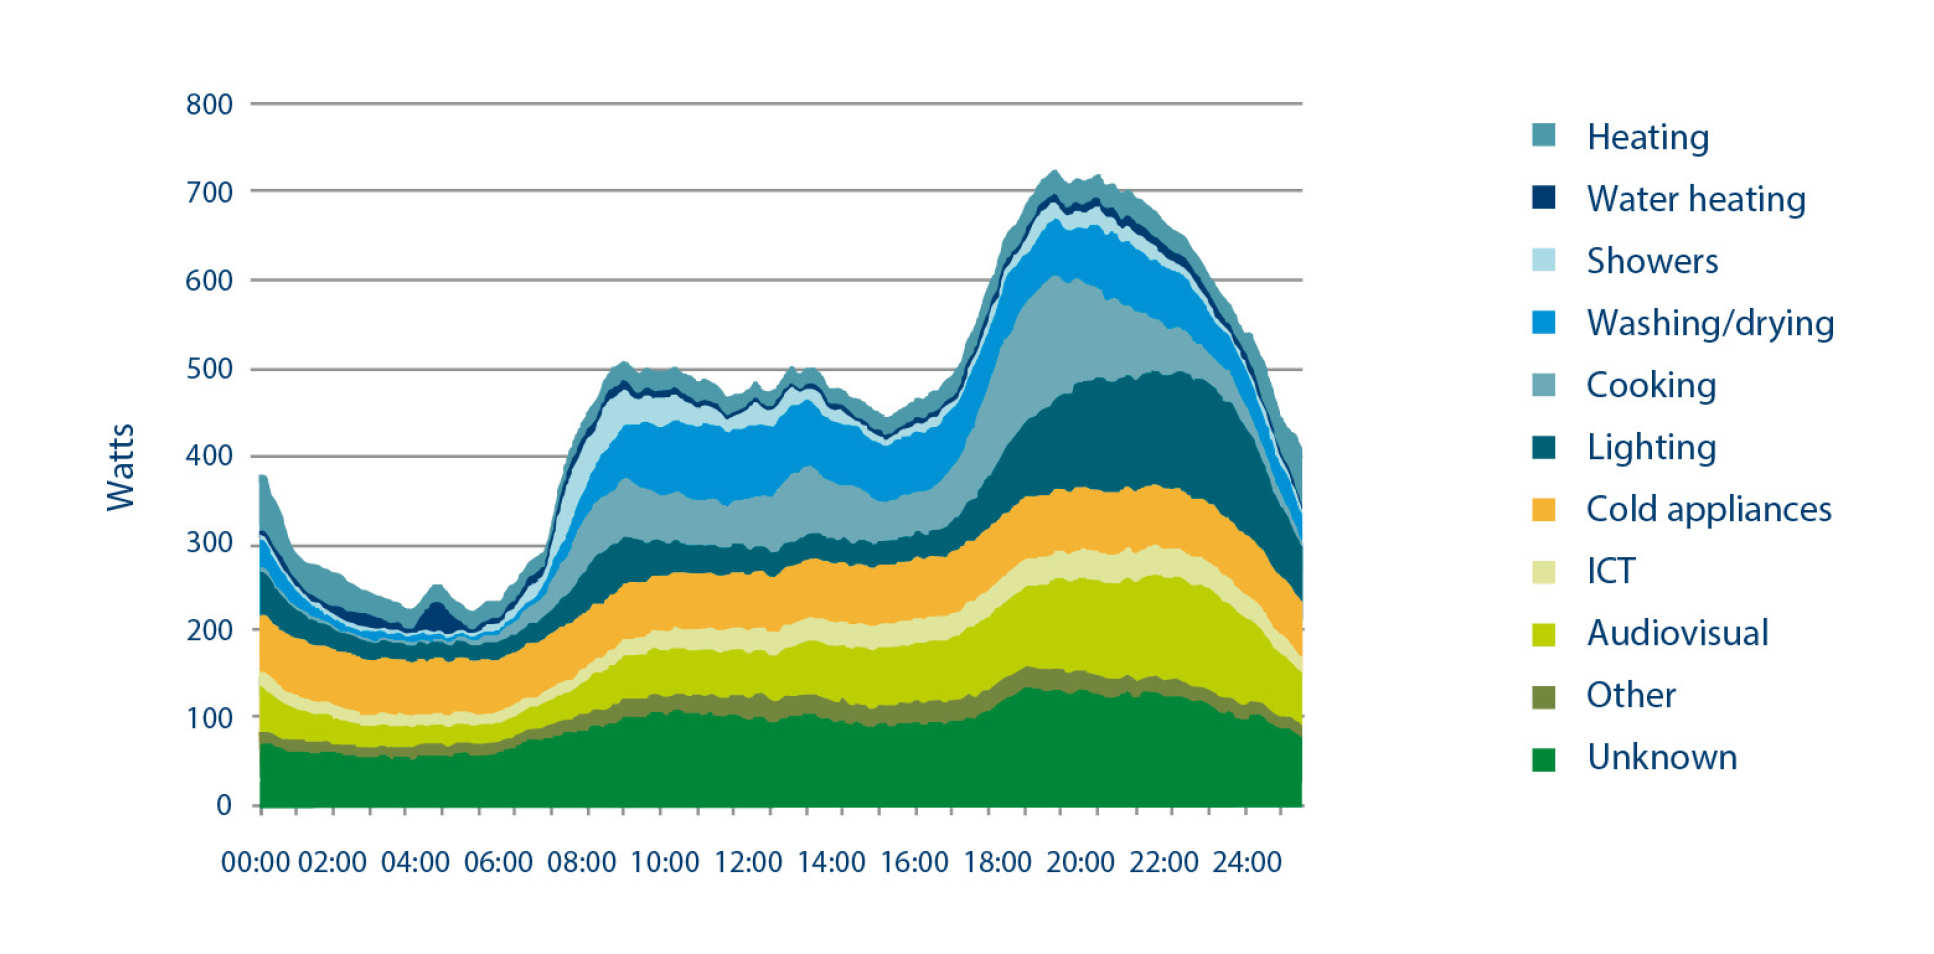 Grpah: UK household electricity consumption profile, all households’ average daily profile over a whole year